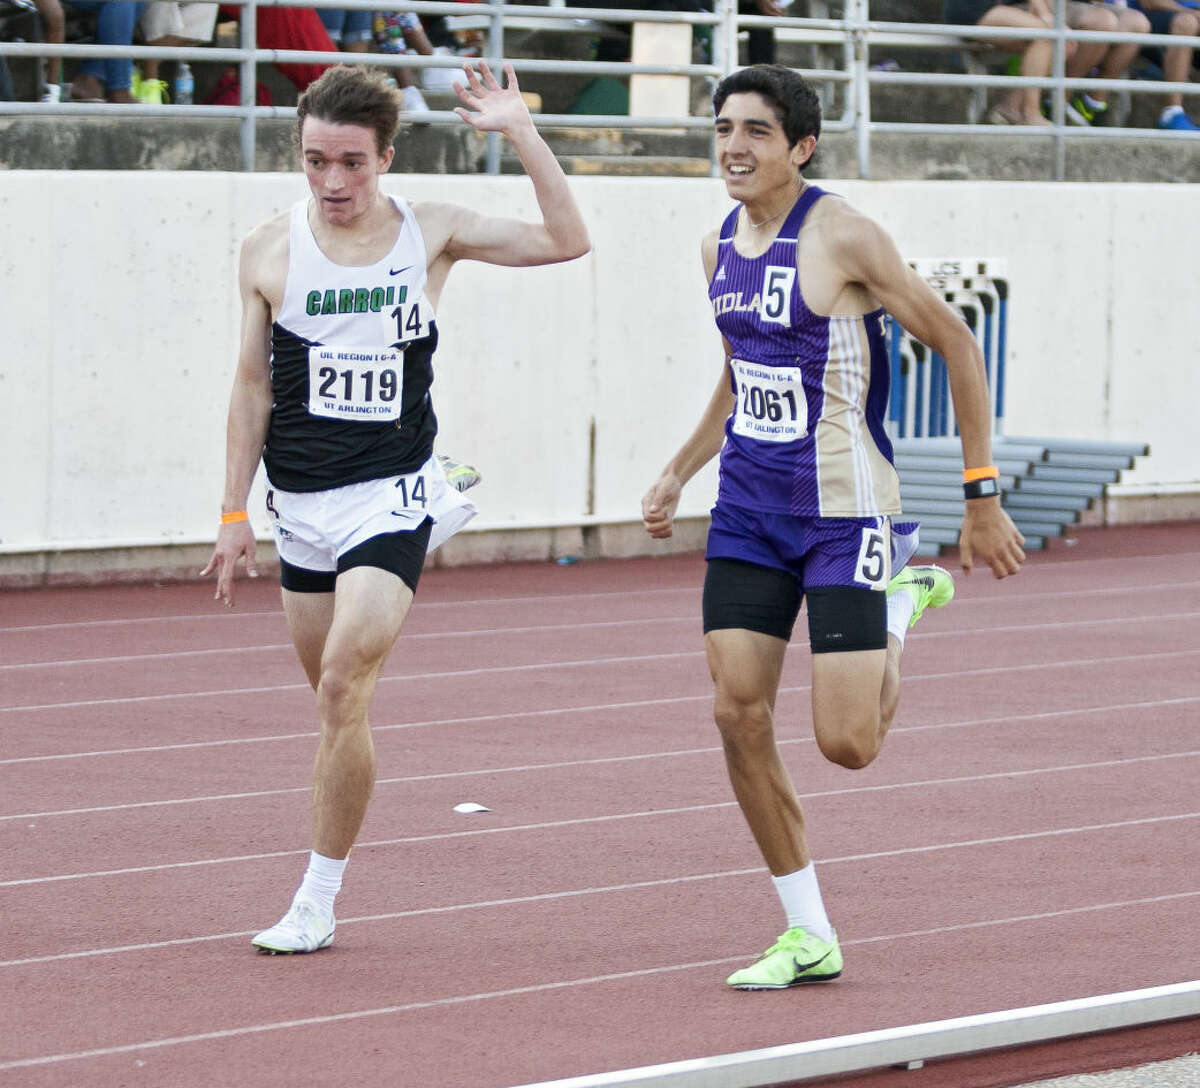 Midland junior Bryce Hoppel passes Southlake Carroll's Johnny Kemps at the end of the 1600M run during the UIL 6A Region 1/5A Region 2 Track and Field Championship on Saturday at Maverick Stadium in Arlington. Hope finished in second with a 4:18.12 run.